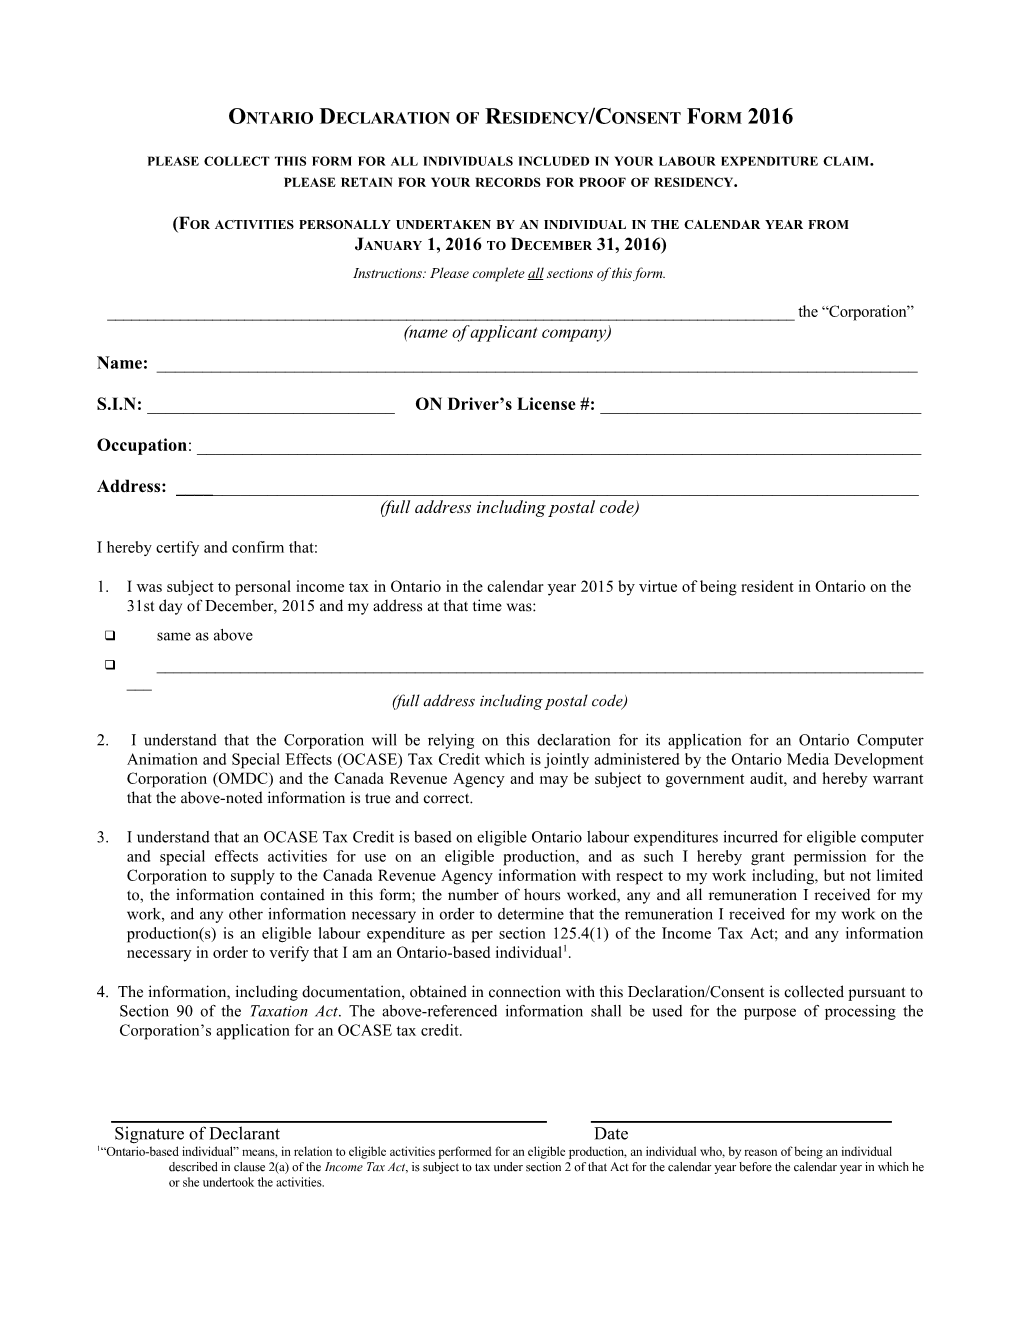 Ontario Declaration of Residency/Consent Form